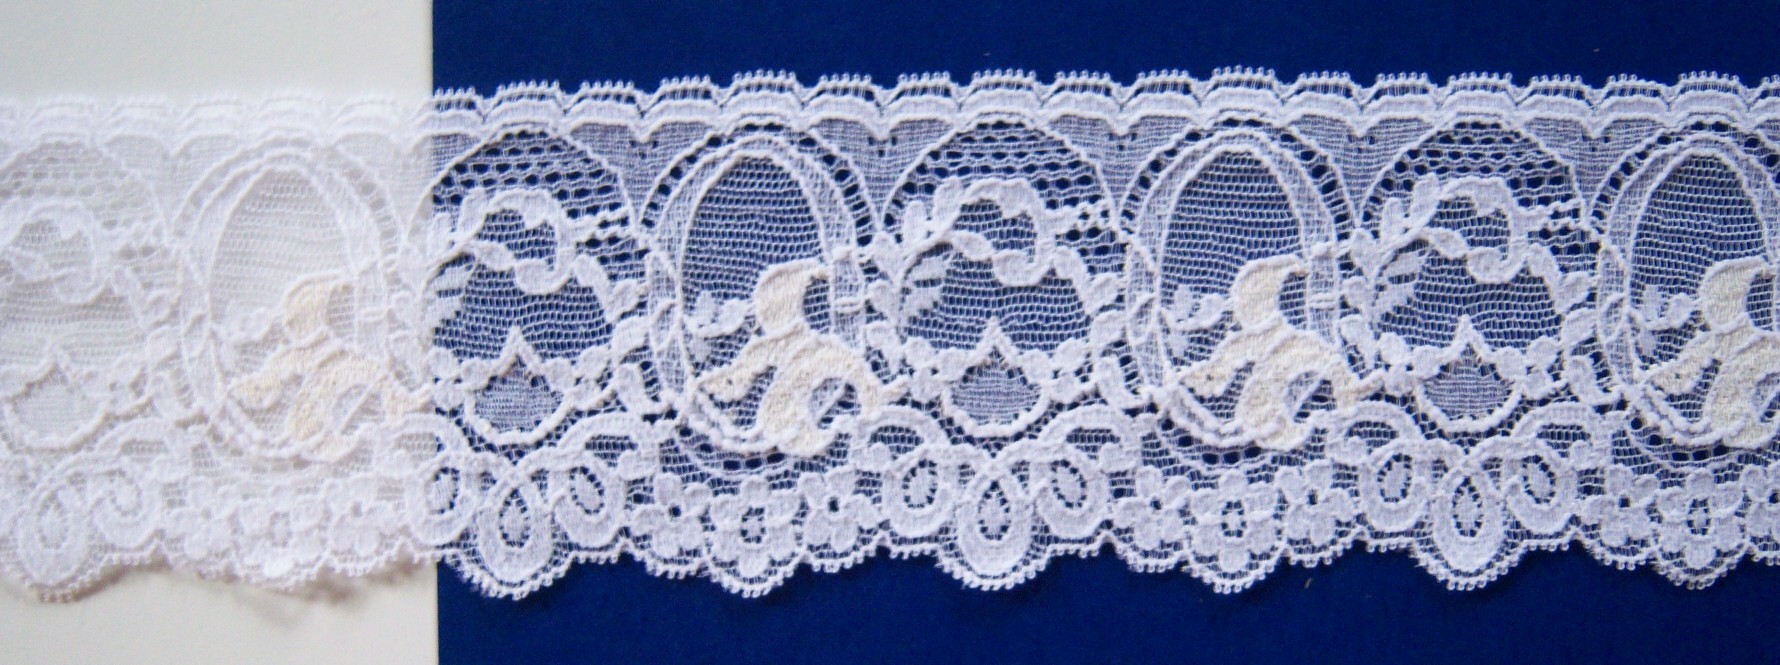 White/Ivory 2 3/4" Stretch Lace